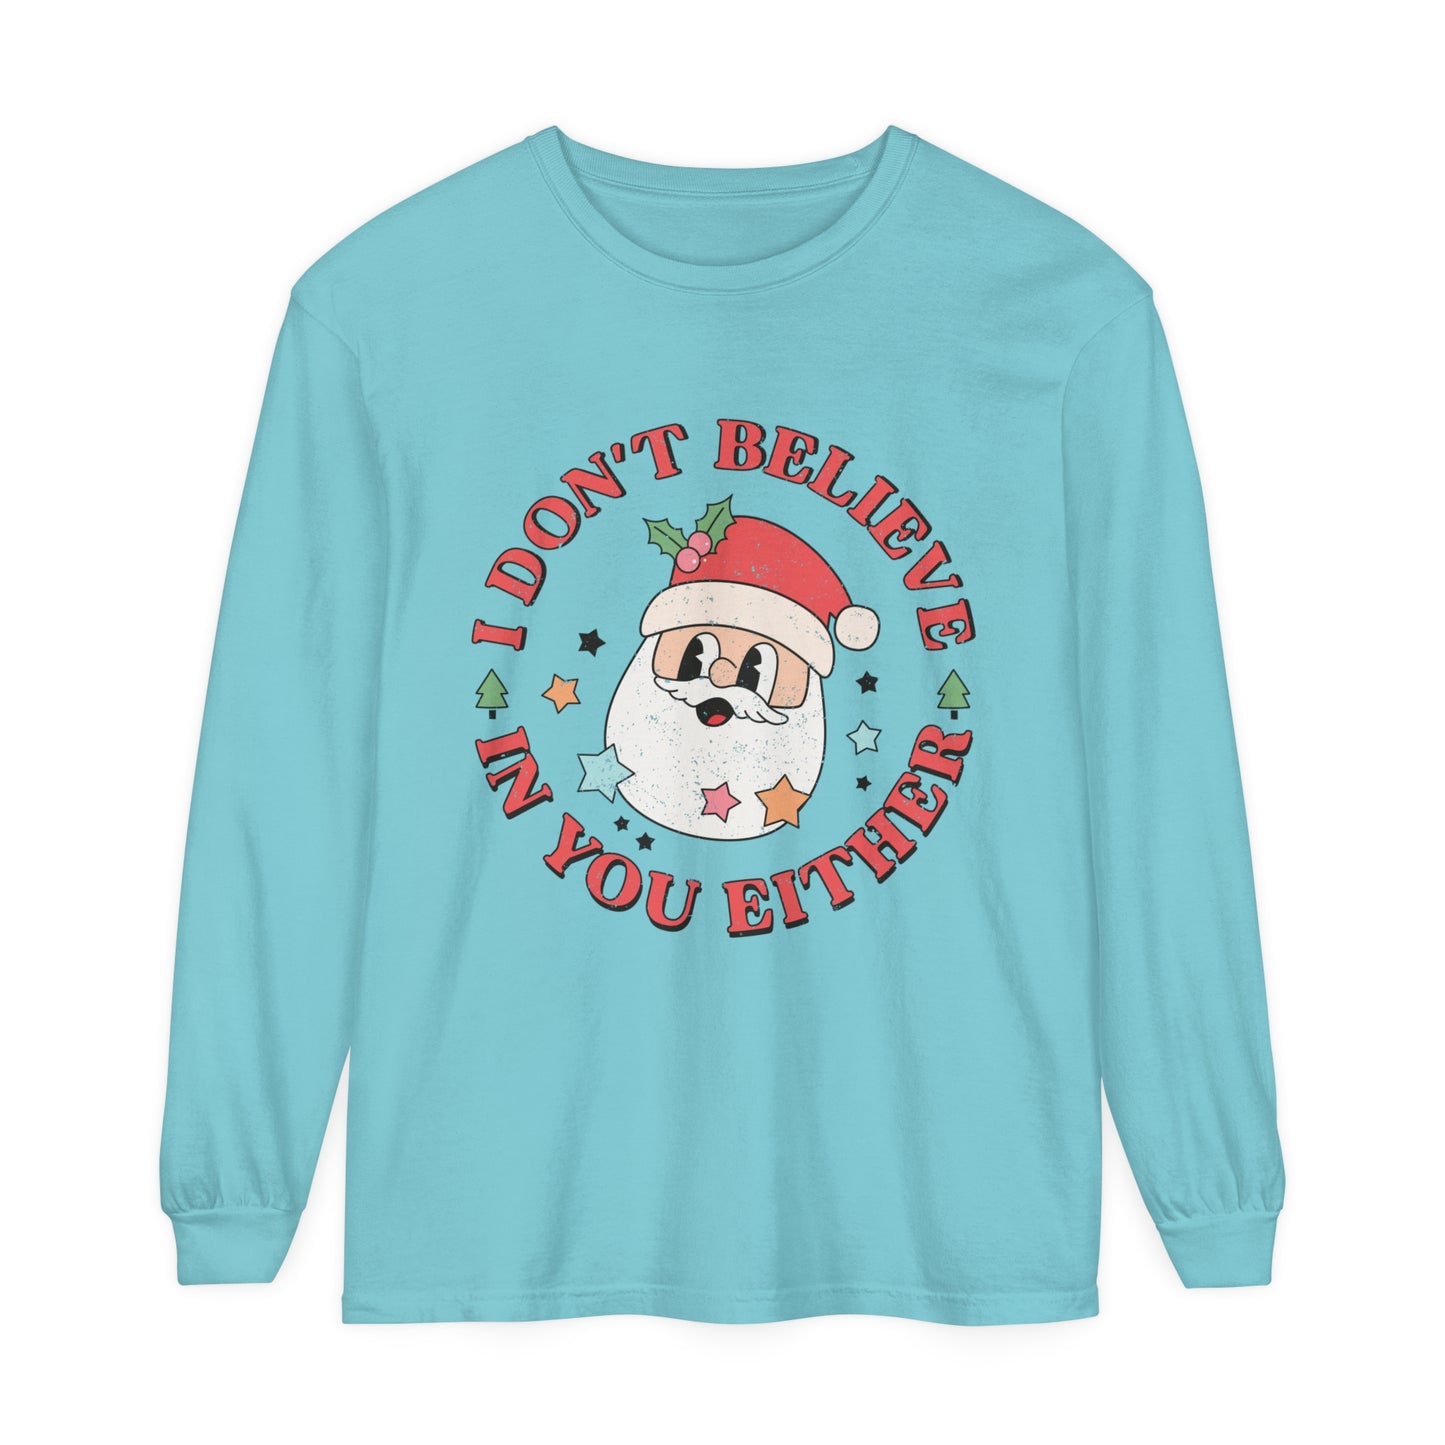 I don't believe in you either Women's Funny Humor Santa Christmas Holiday Loose Long Sleeve T-Shirt